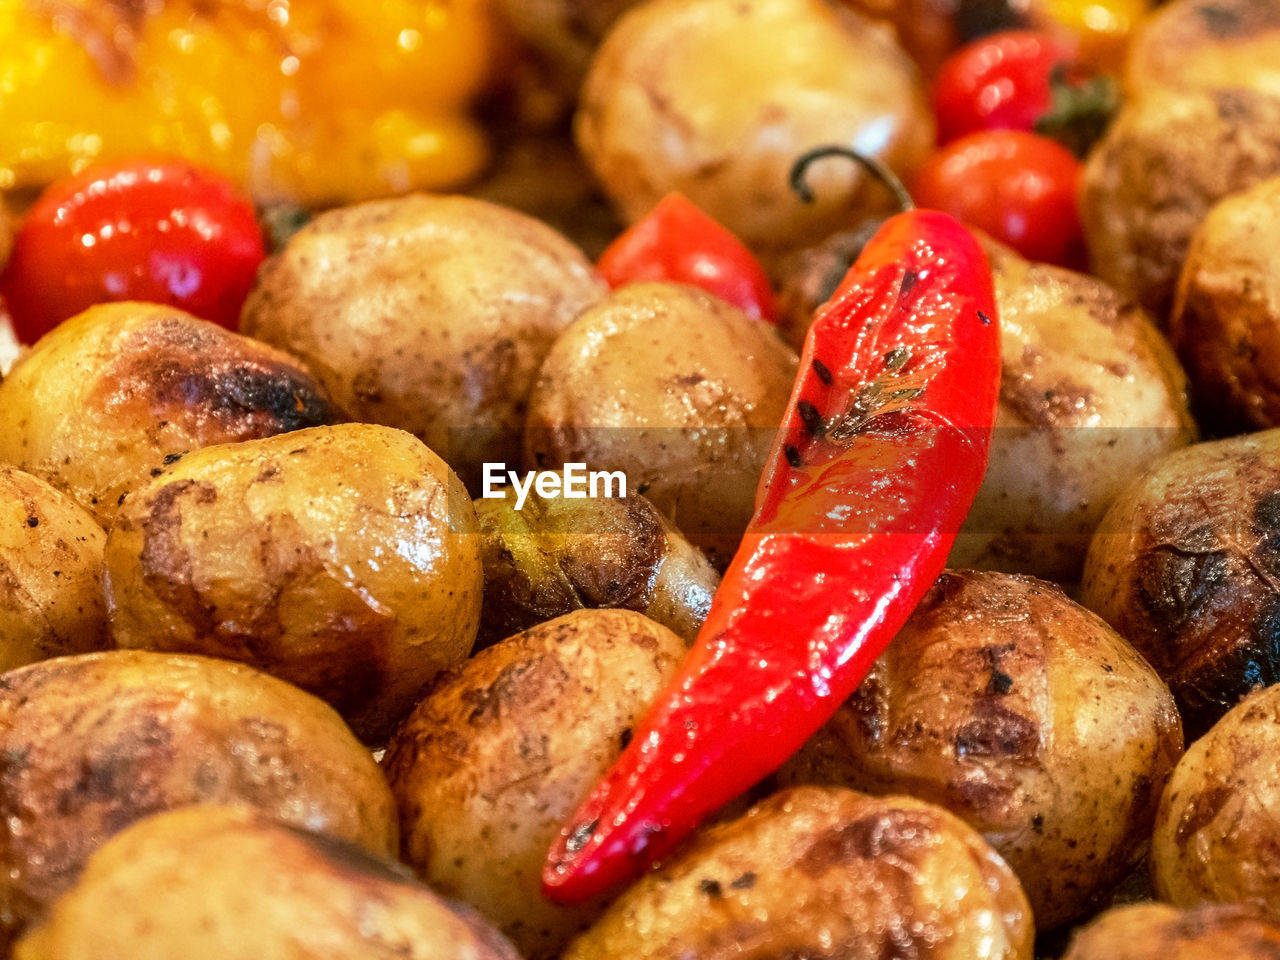 Roasted red pepper lies on the baked potat, close up. grilled food. festival of street food. 